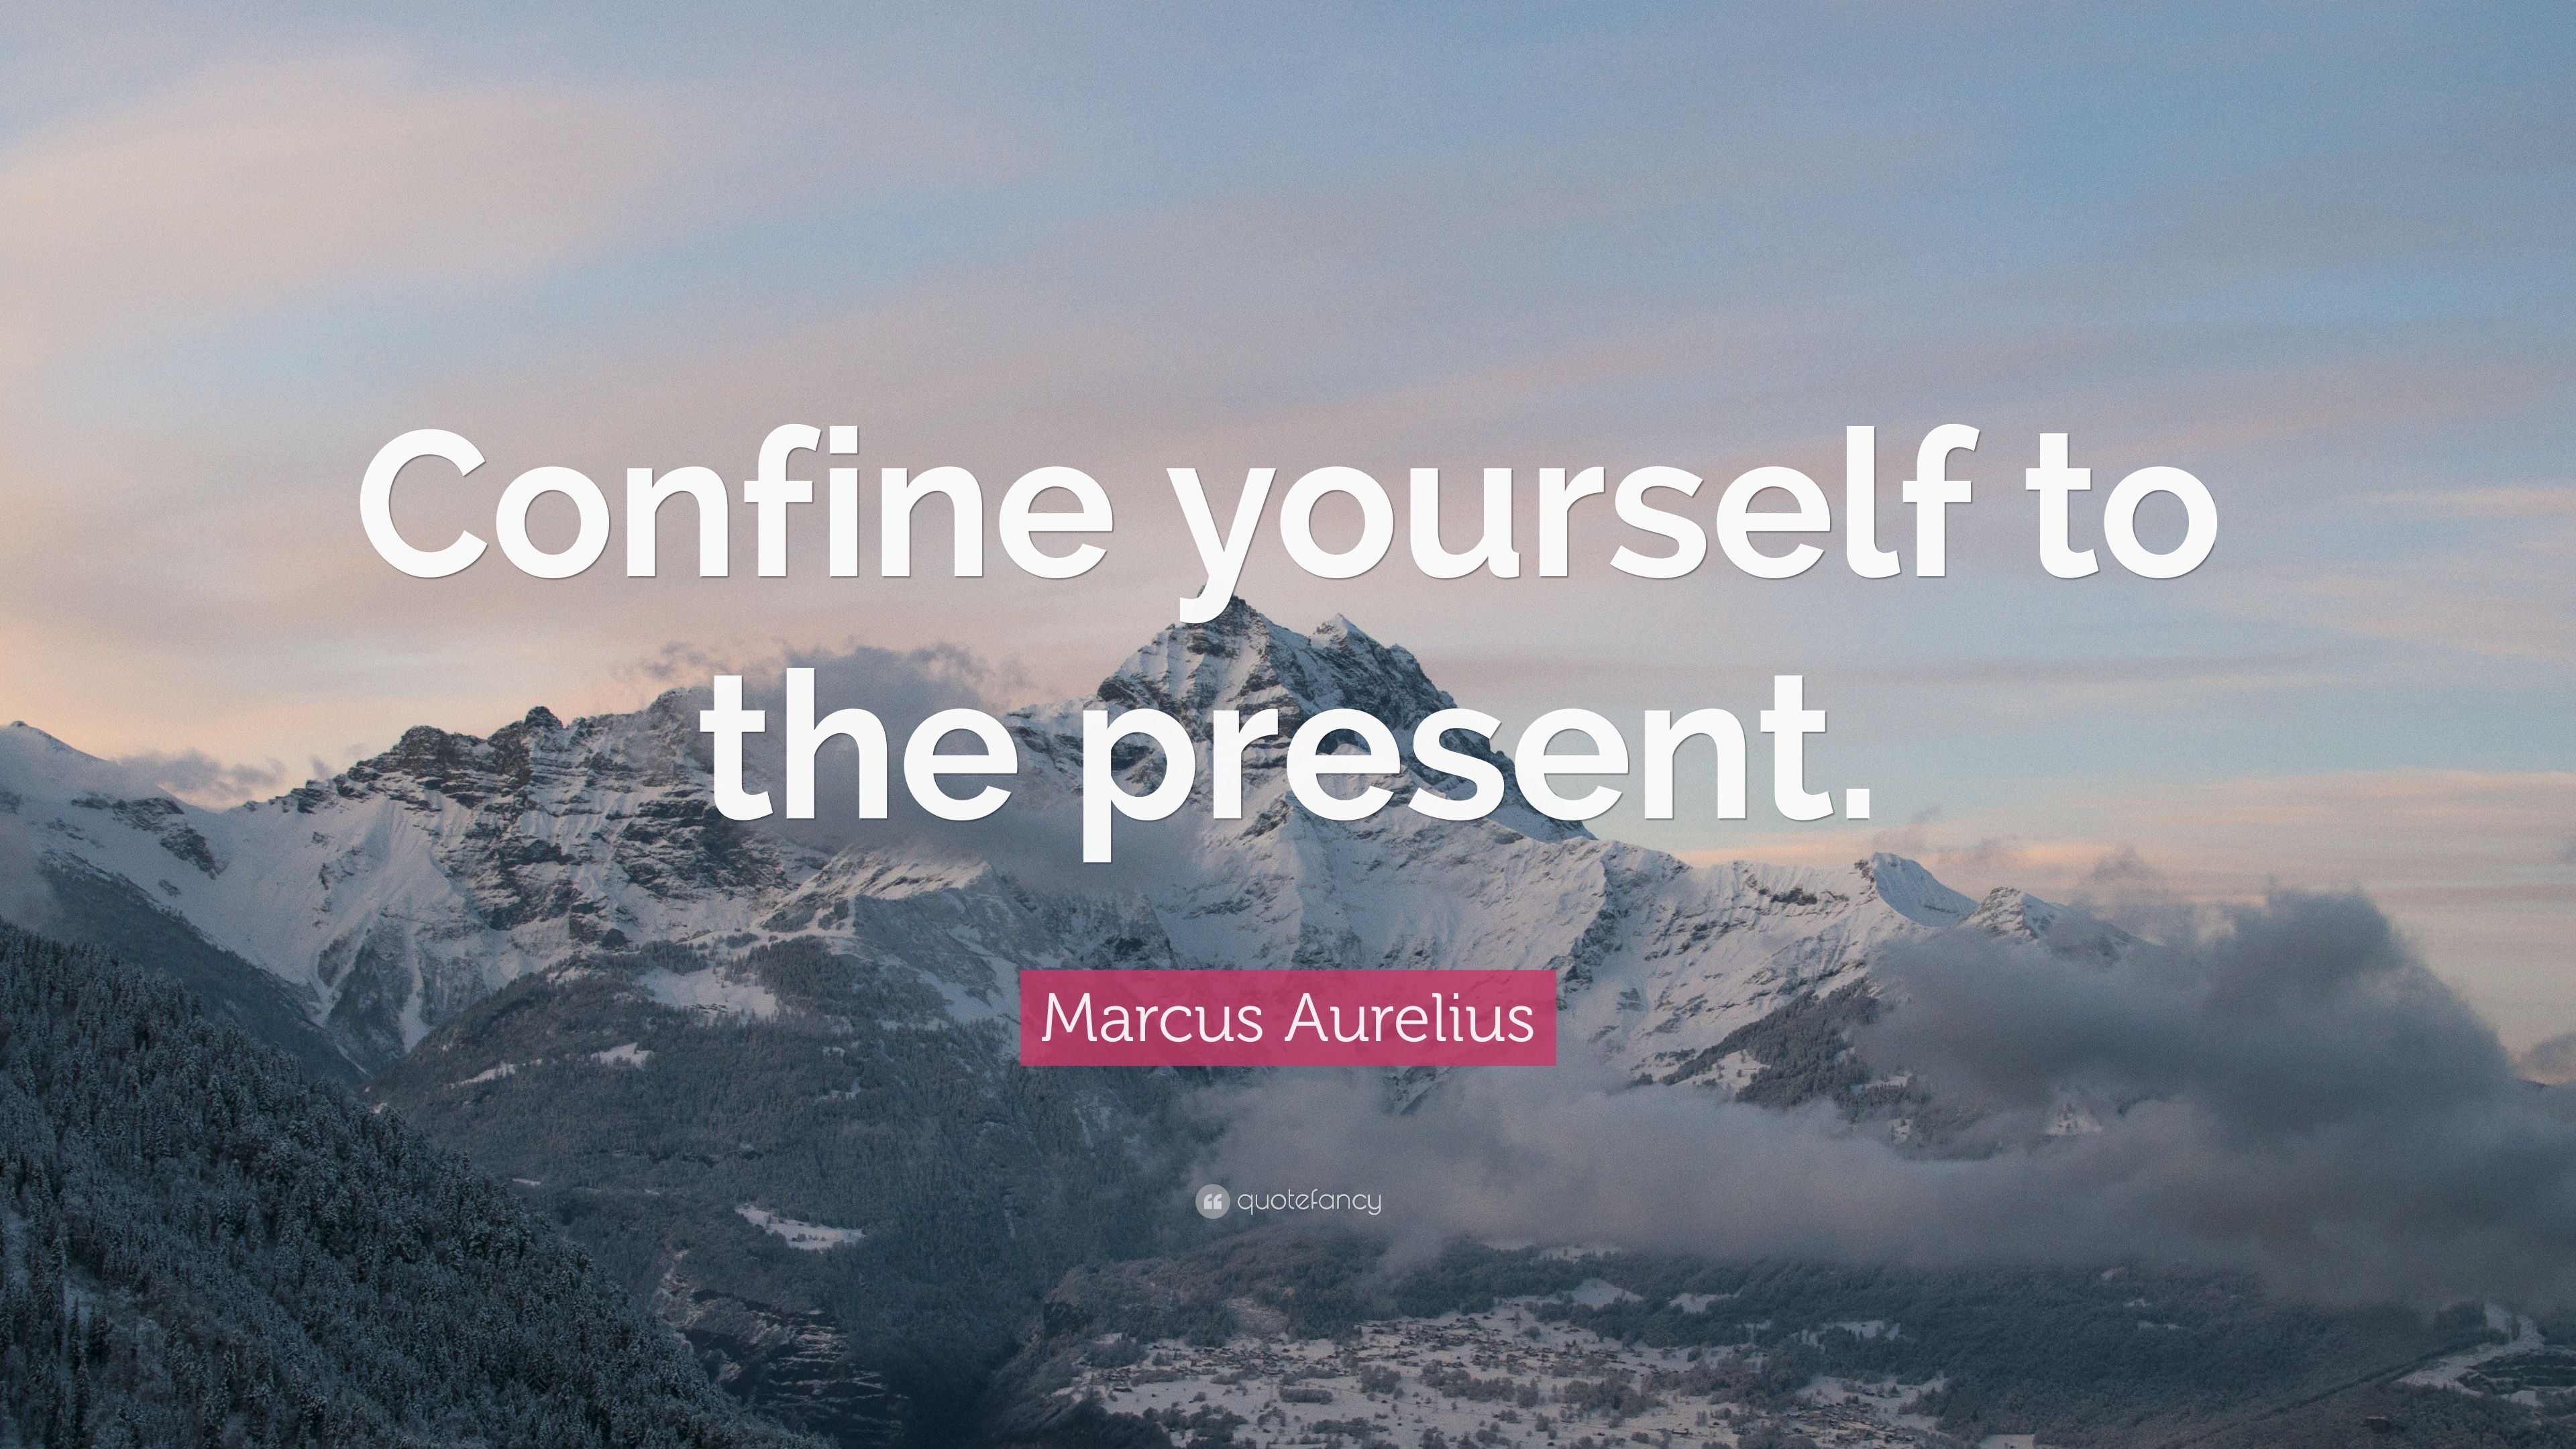 Mindfulness Quotes (40 wallpaper)